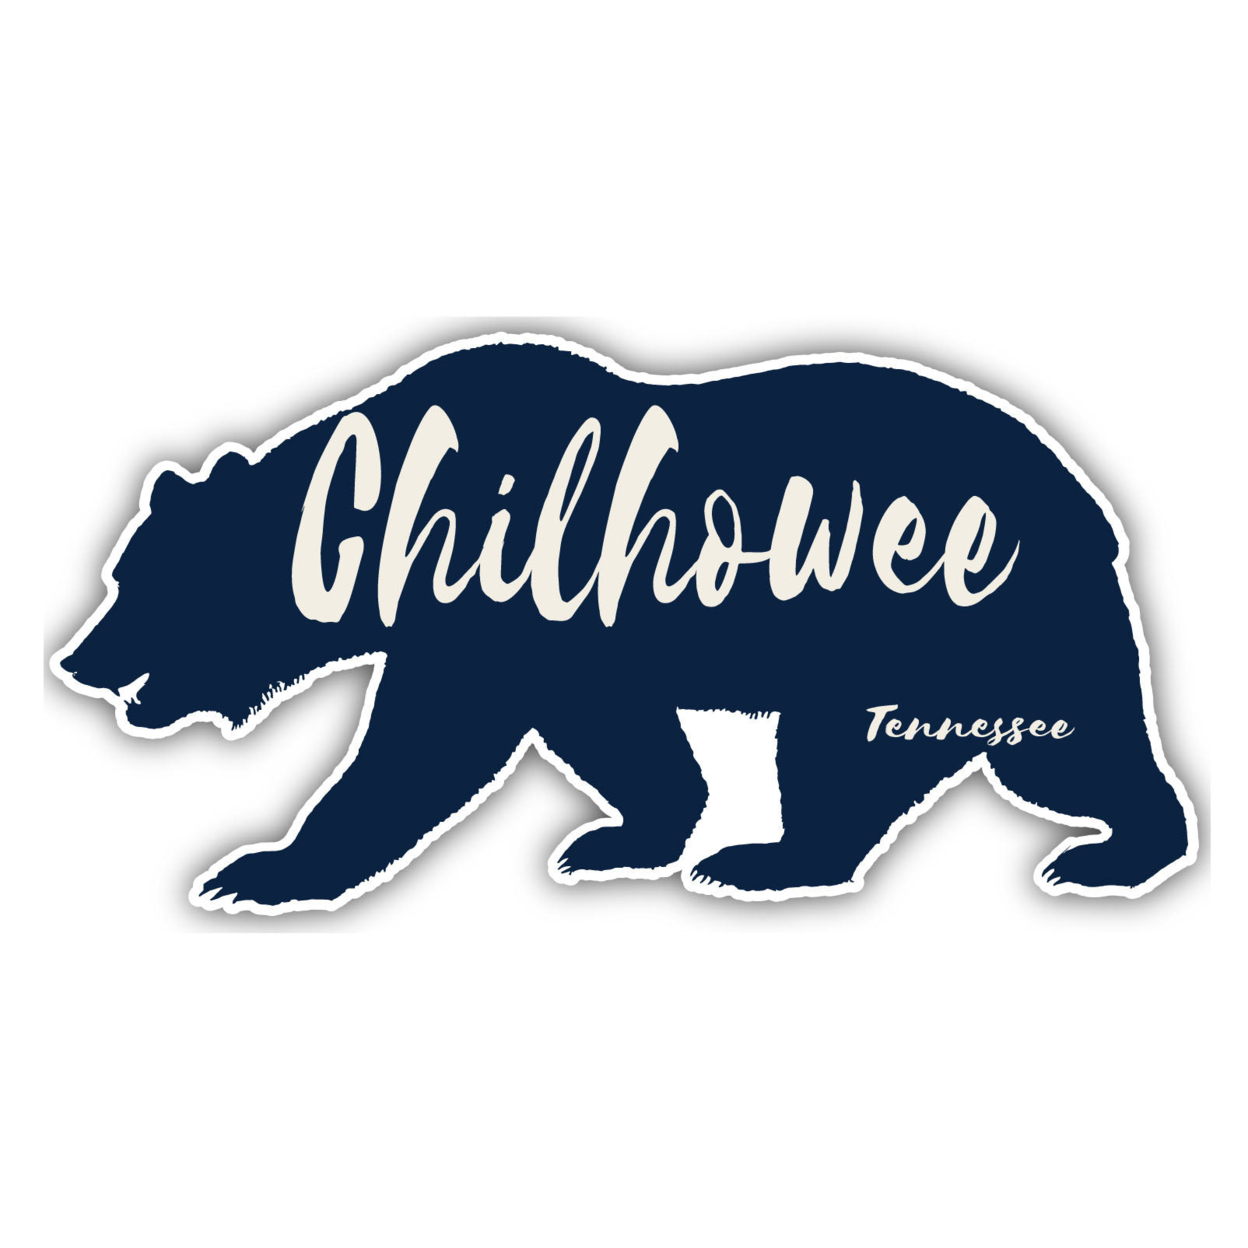 Chilhowee Tennessee Souvenir Decorative Stickers (Choose Theme And Size) - Single Unit, 2-Inch, Bear